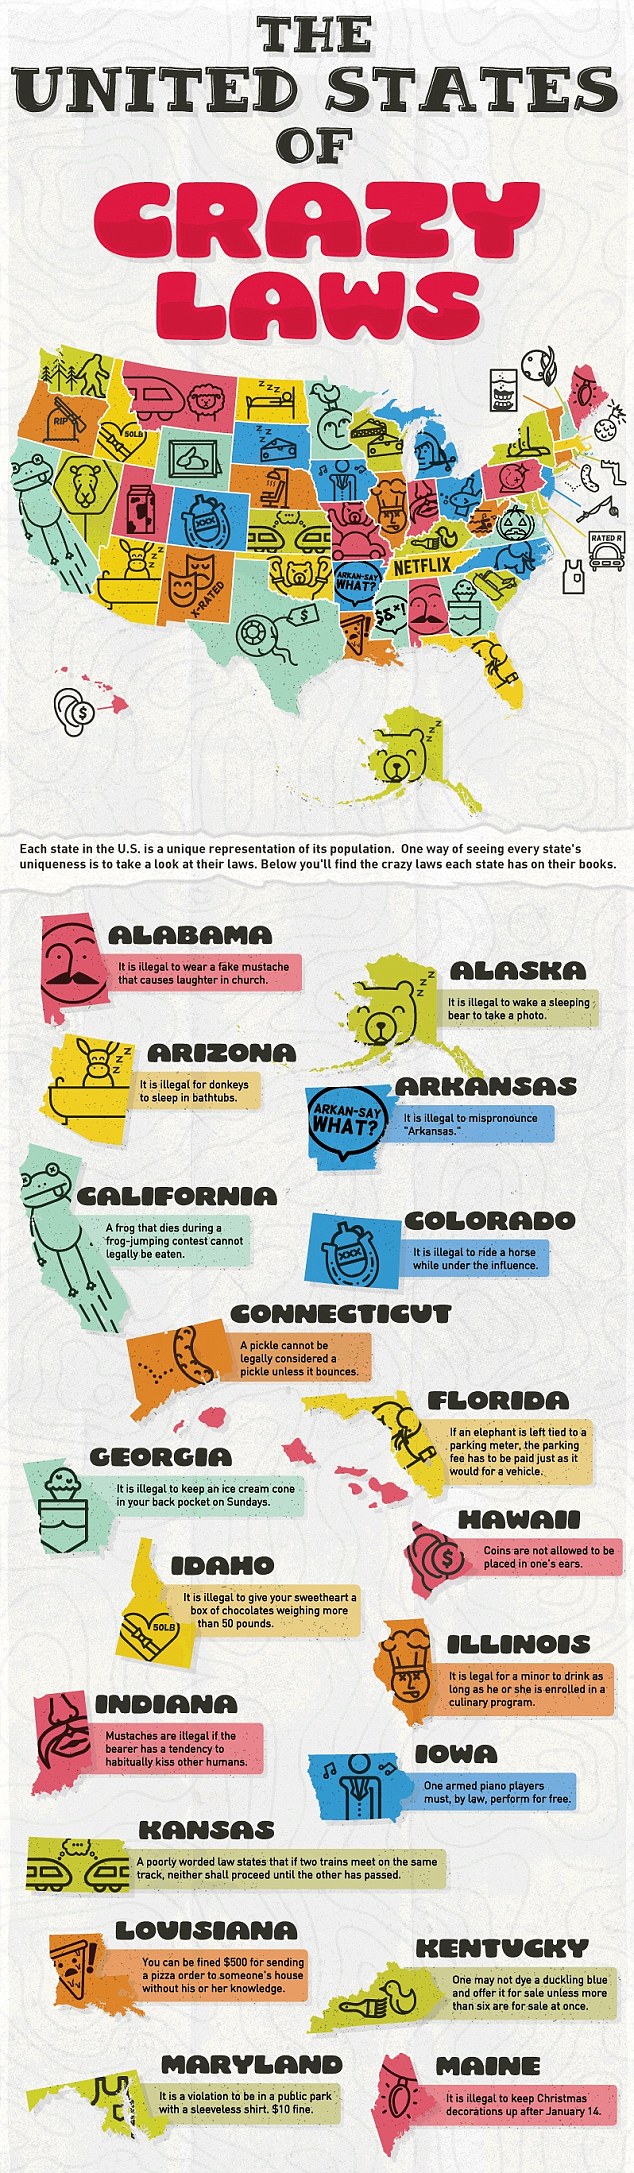 Infographic Reveals The Craziest Laws That Still Exist In The United